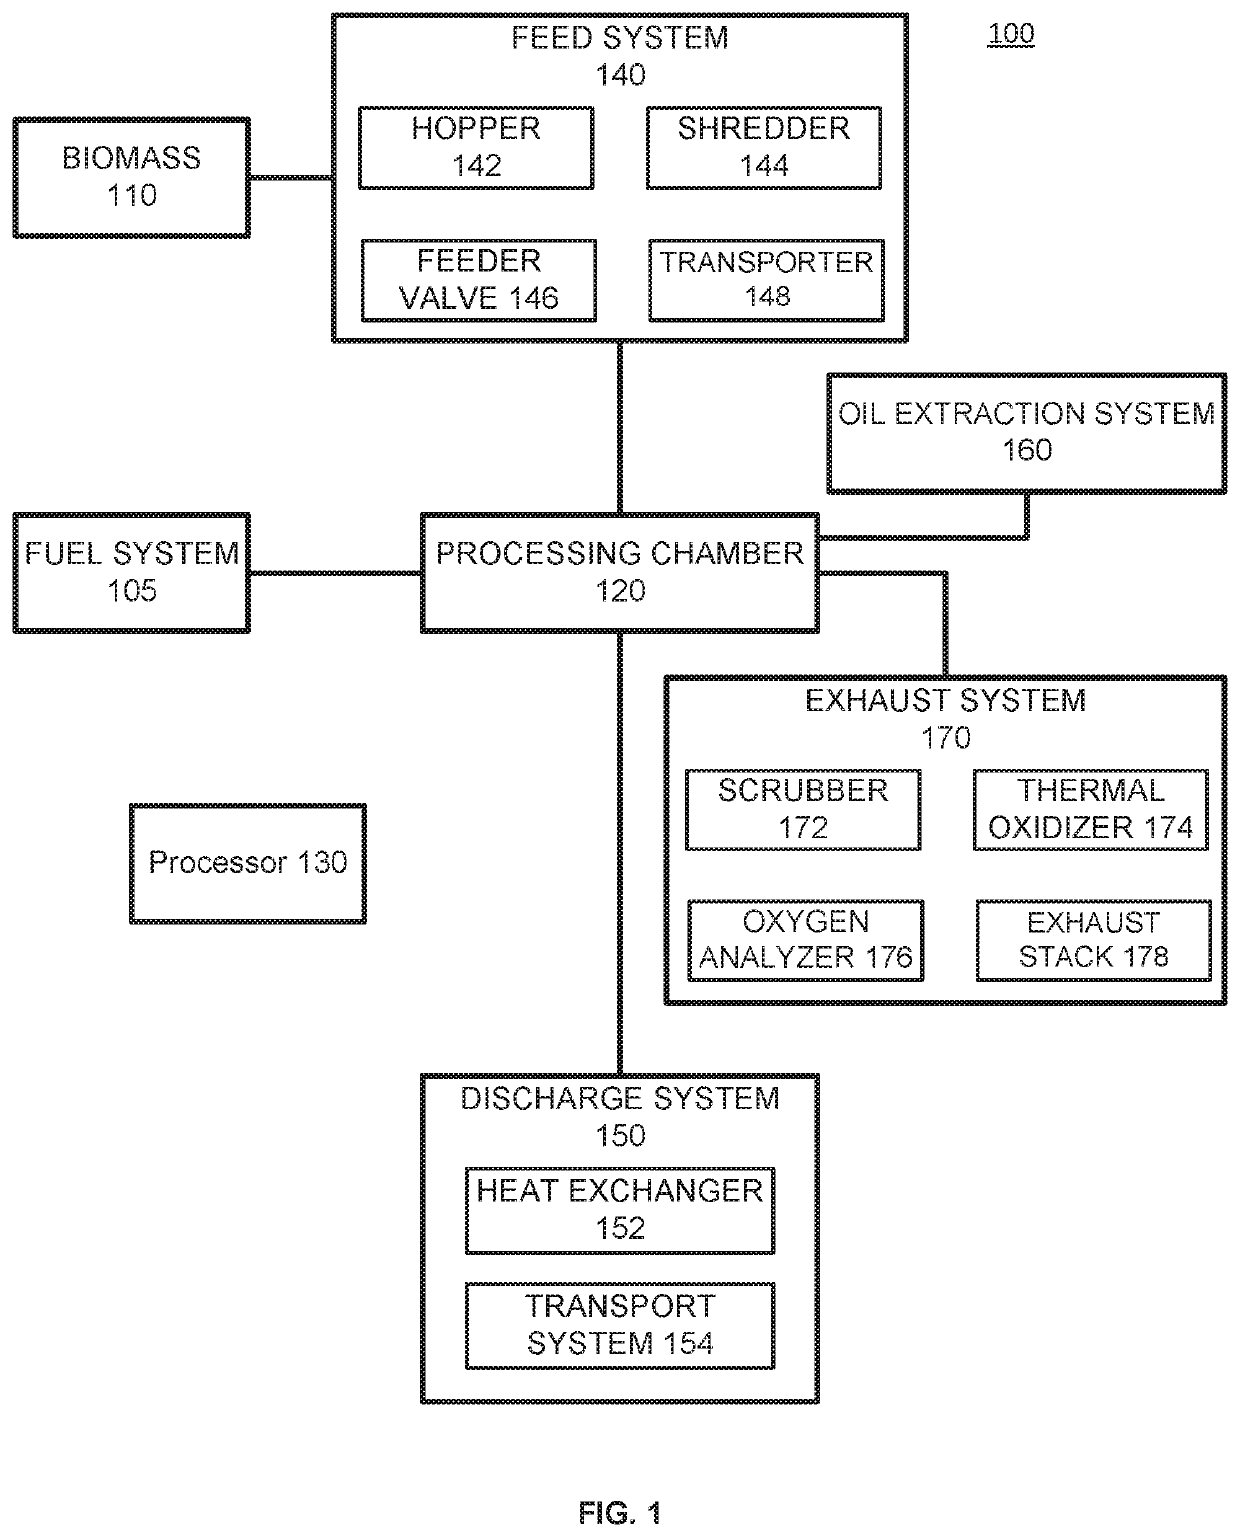 Methods and Systems for Producing Biochar